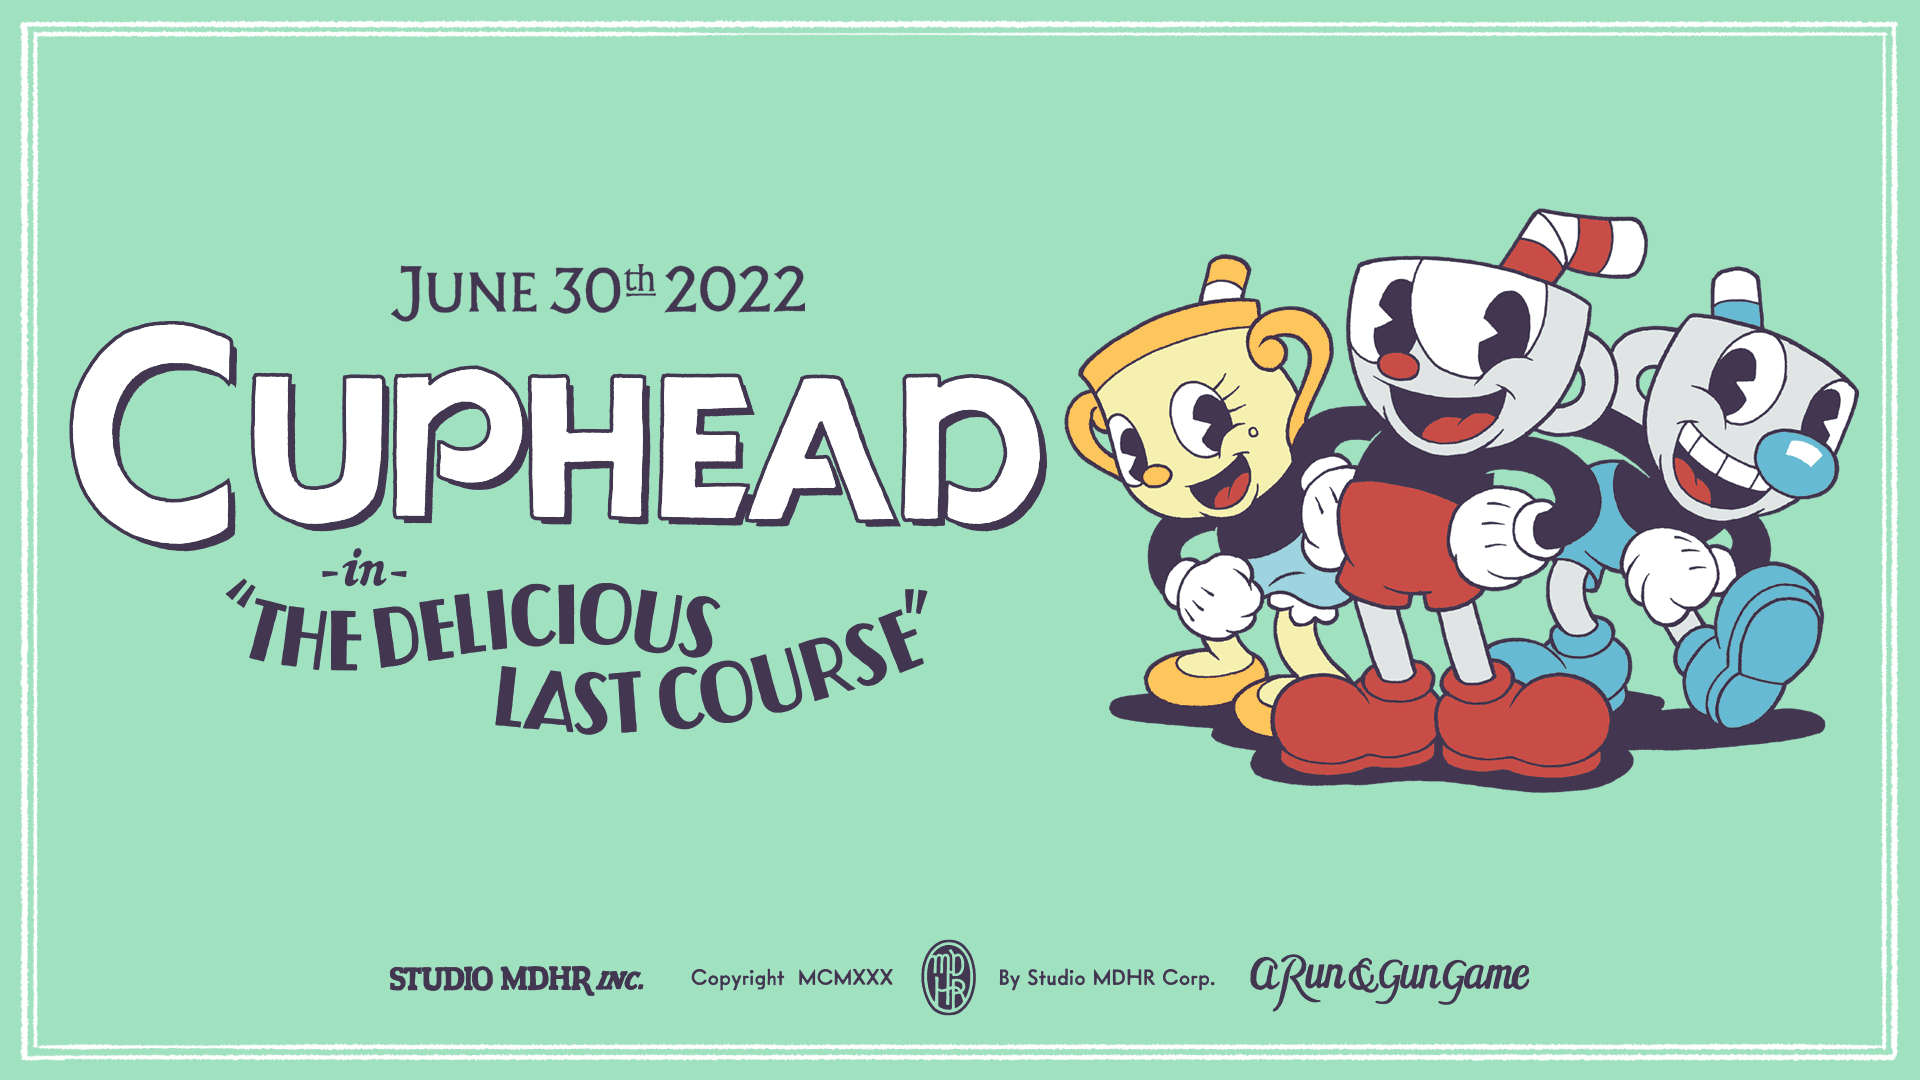 Experience the wild and whimsical world of Cuphead!